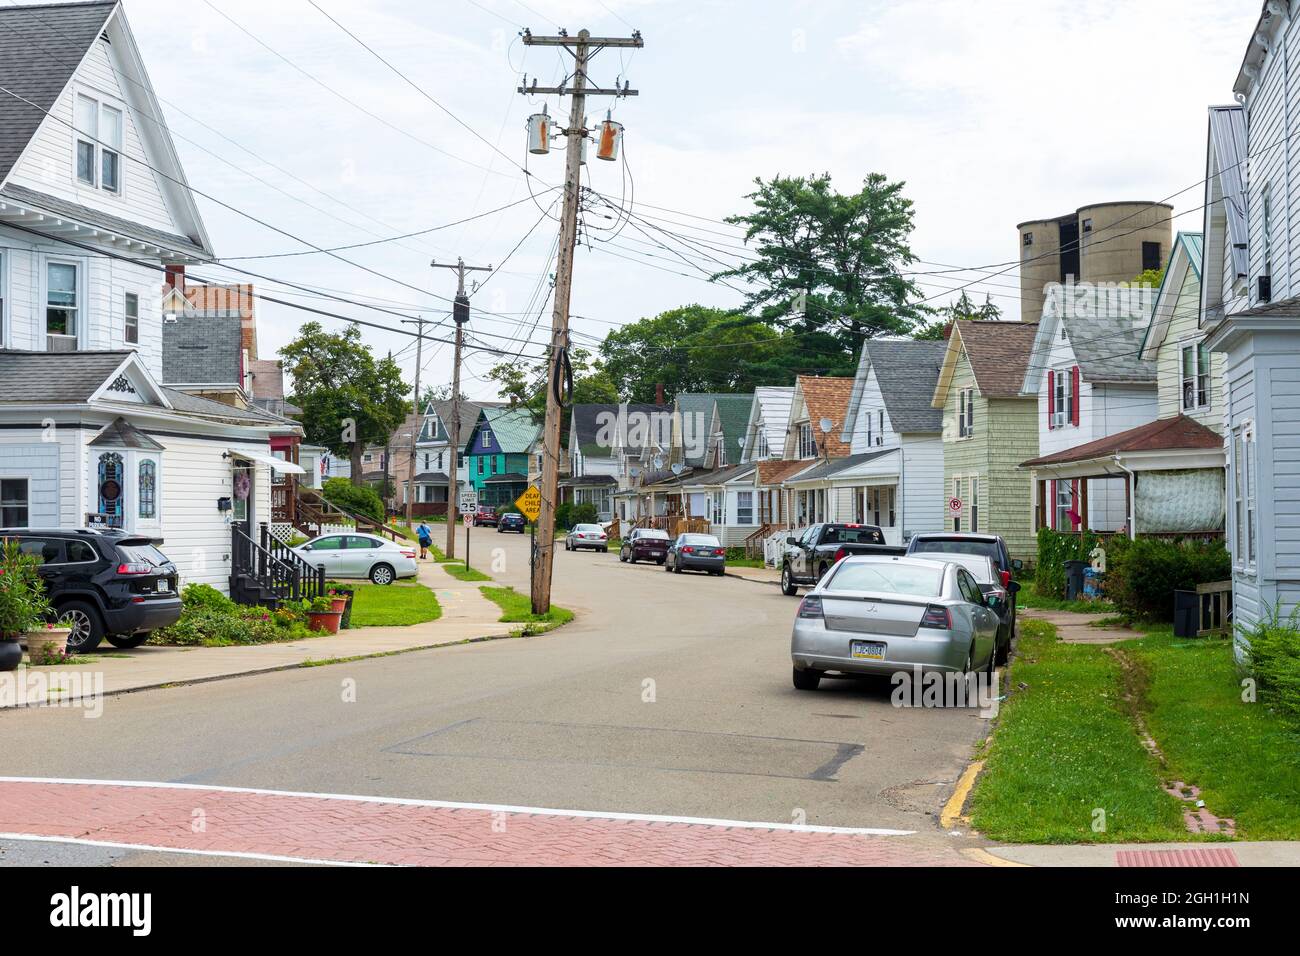 BRADFORD, PA, USA-13 AUGUST 2021: A residential street consisteing of similar single-family homes in small-town America. Stock Photo